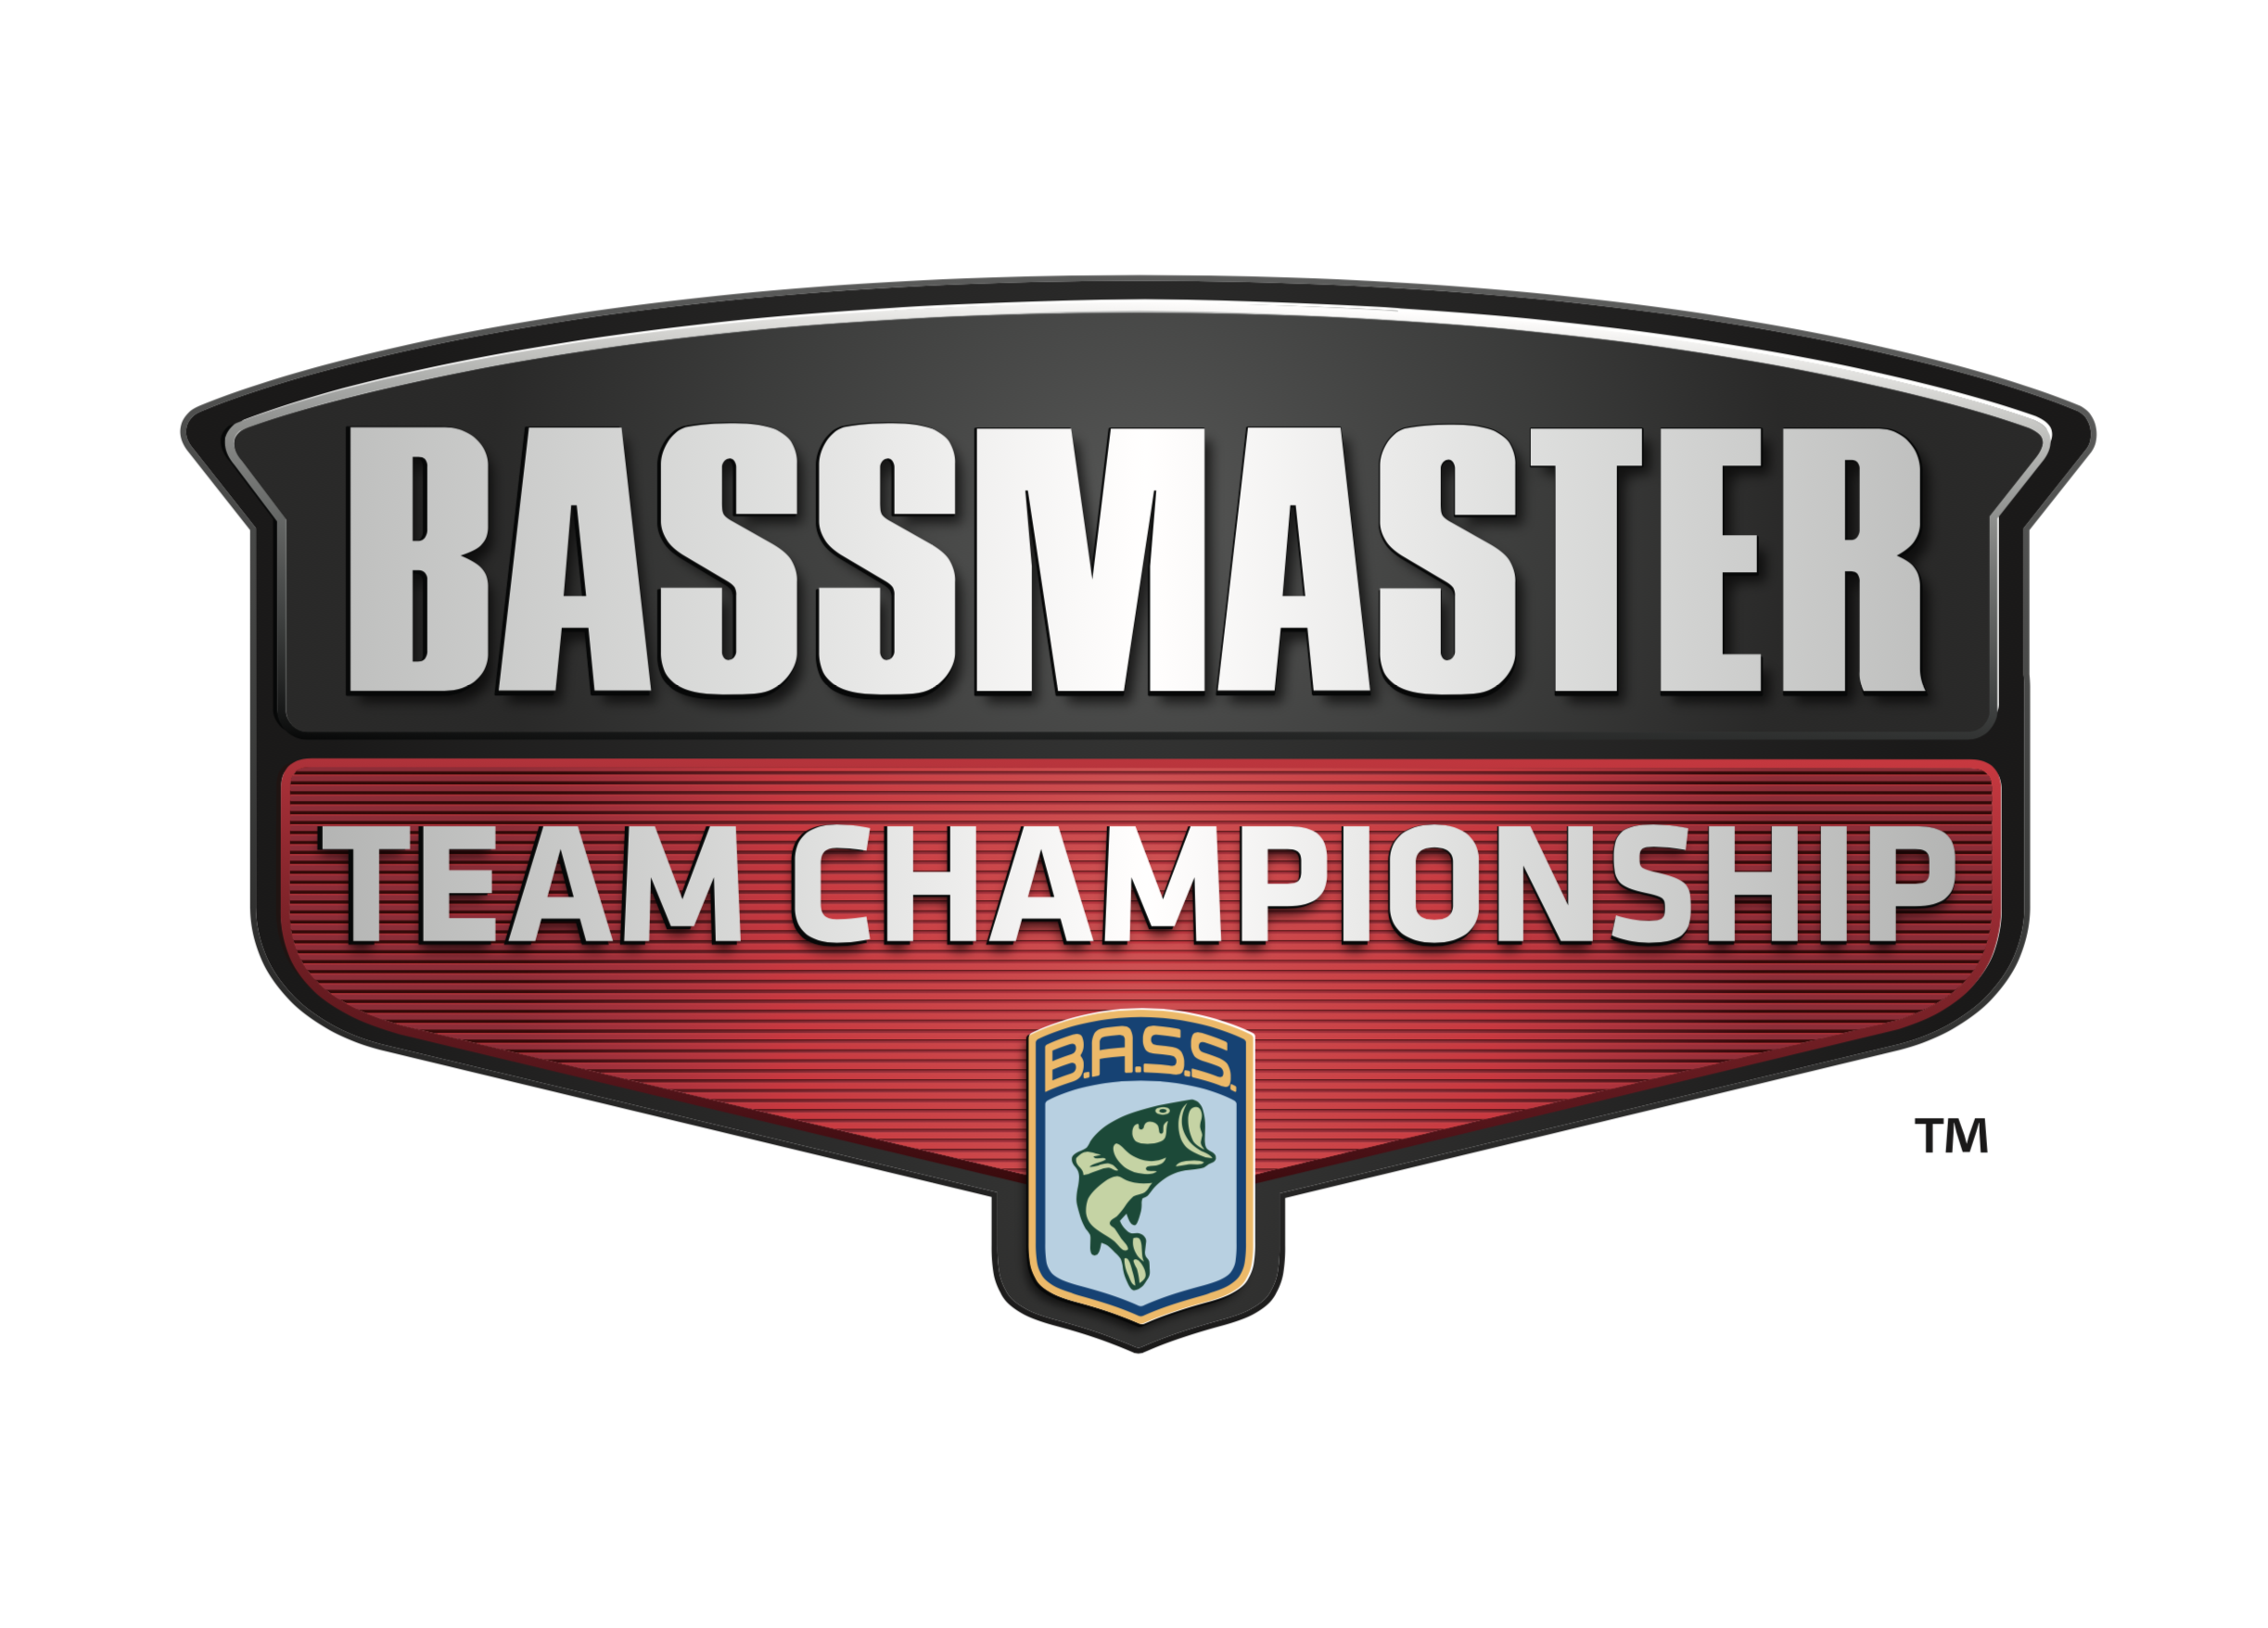 The final event of 2018 is the Bassmaster Team Championship. One angler will qualify for the Classic in this event. The top three teams after the team portion will fish in a six person fish-off for the final spot. Missouri's Ryan Butler won the fish-off in 2017 to make the Lake Hartwell Classic.